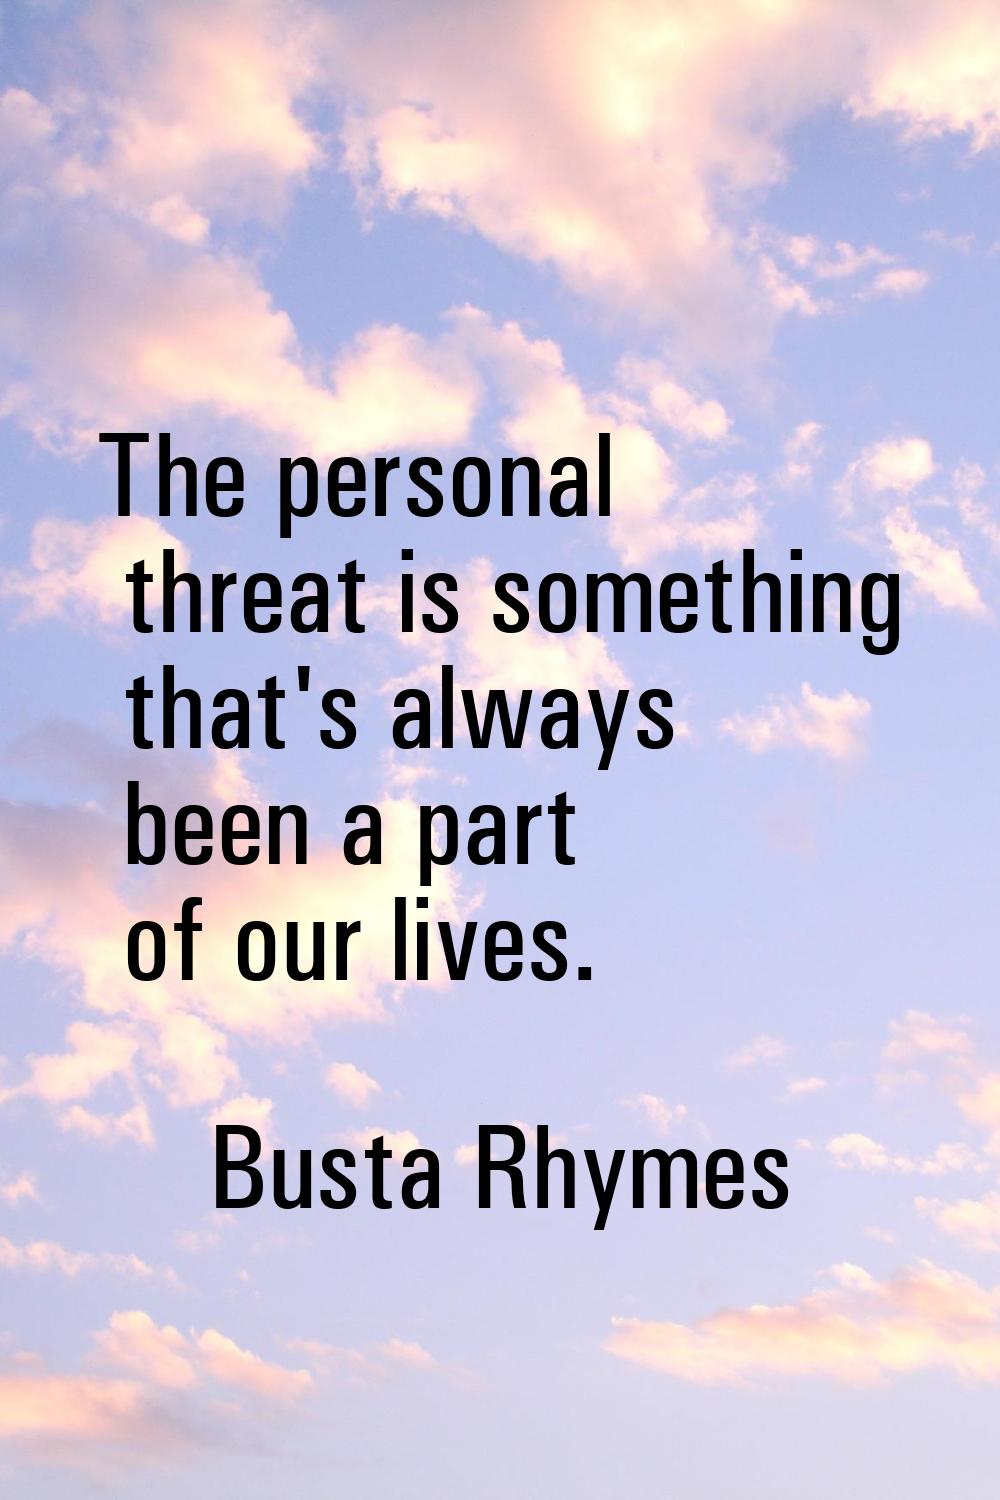 The personal threat is something that's always been a part of our lives.